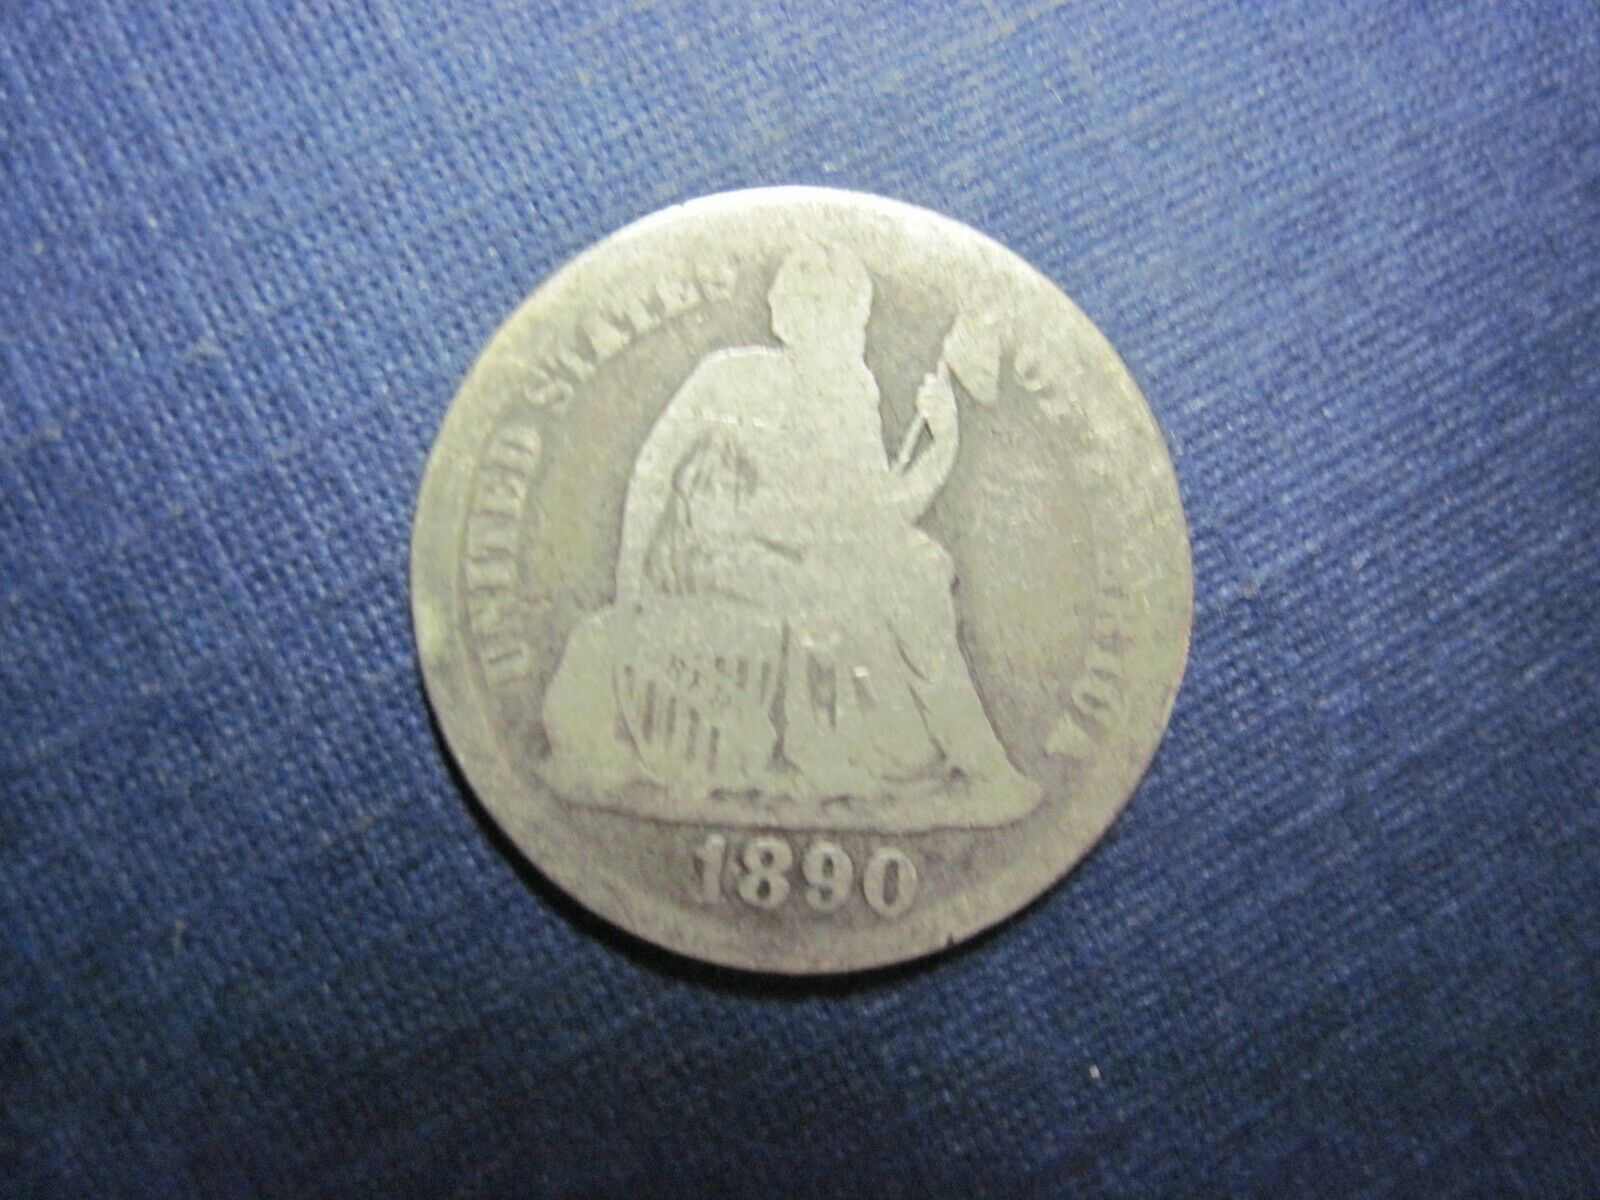 Circulated 1890 Liberty Seated Dime Variety 4 Resumed Legend On Obverse Ungraded